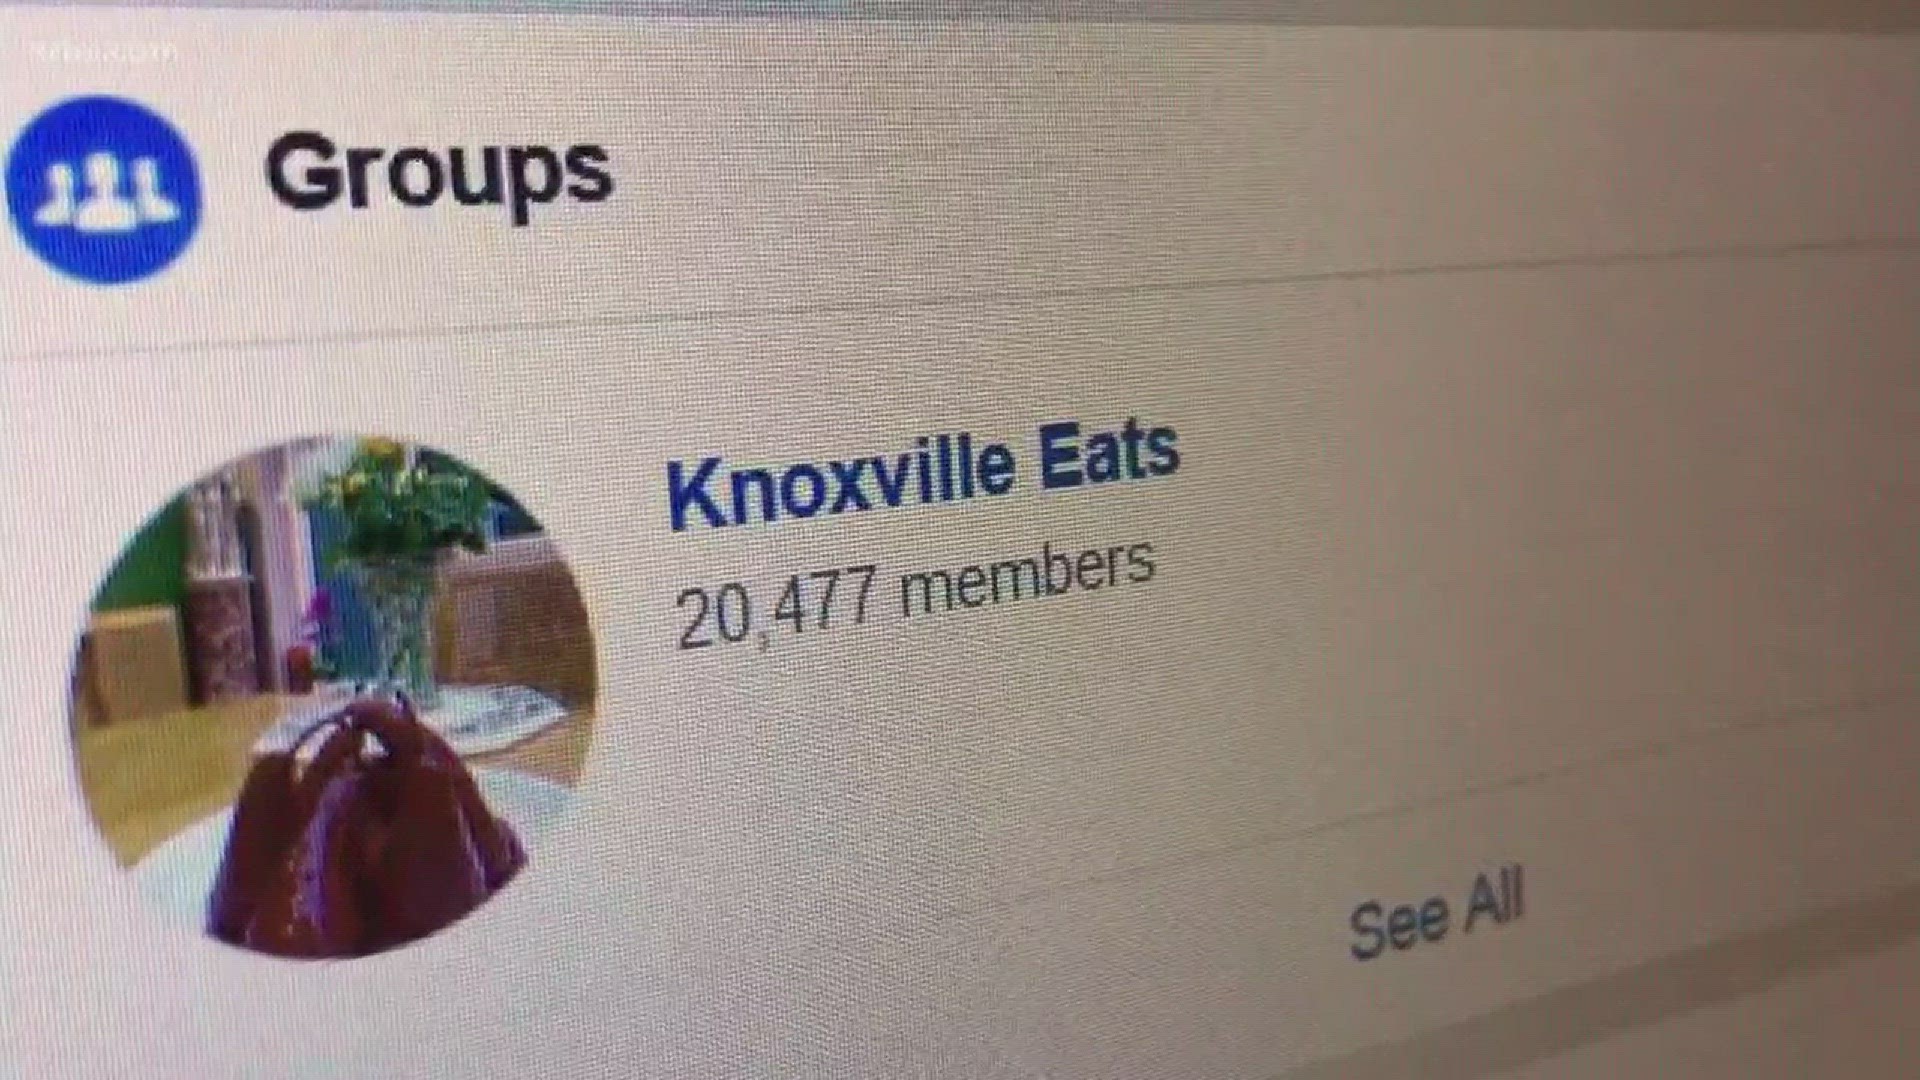 Knoxville Eats is a Facebook group that celebrates everything food related.
November 21, 2017-4pm